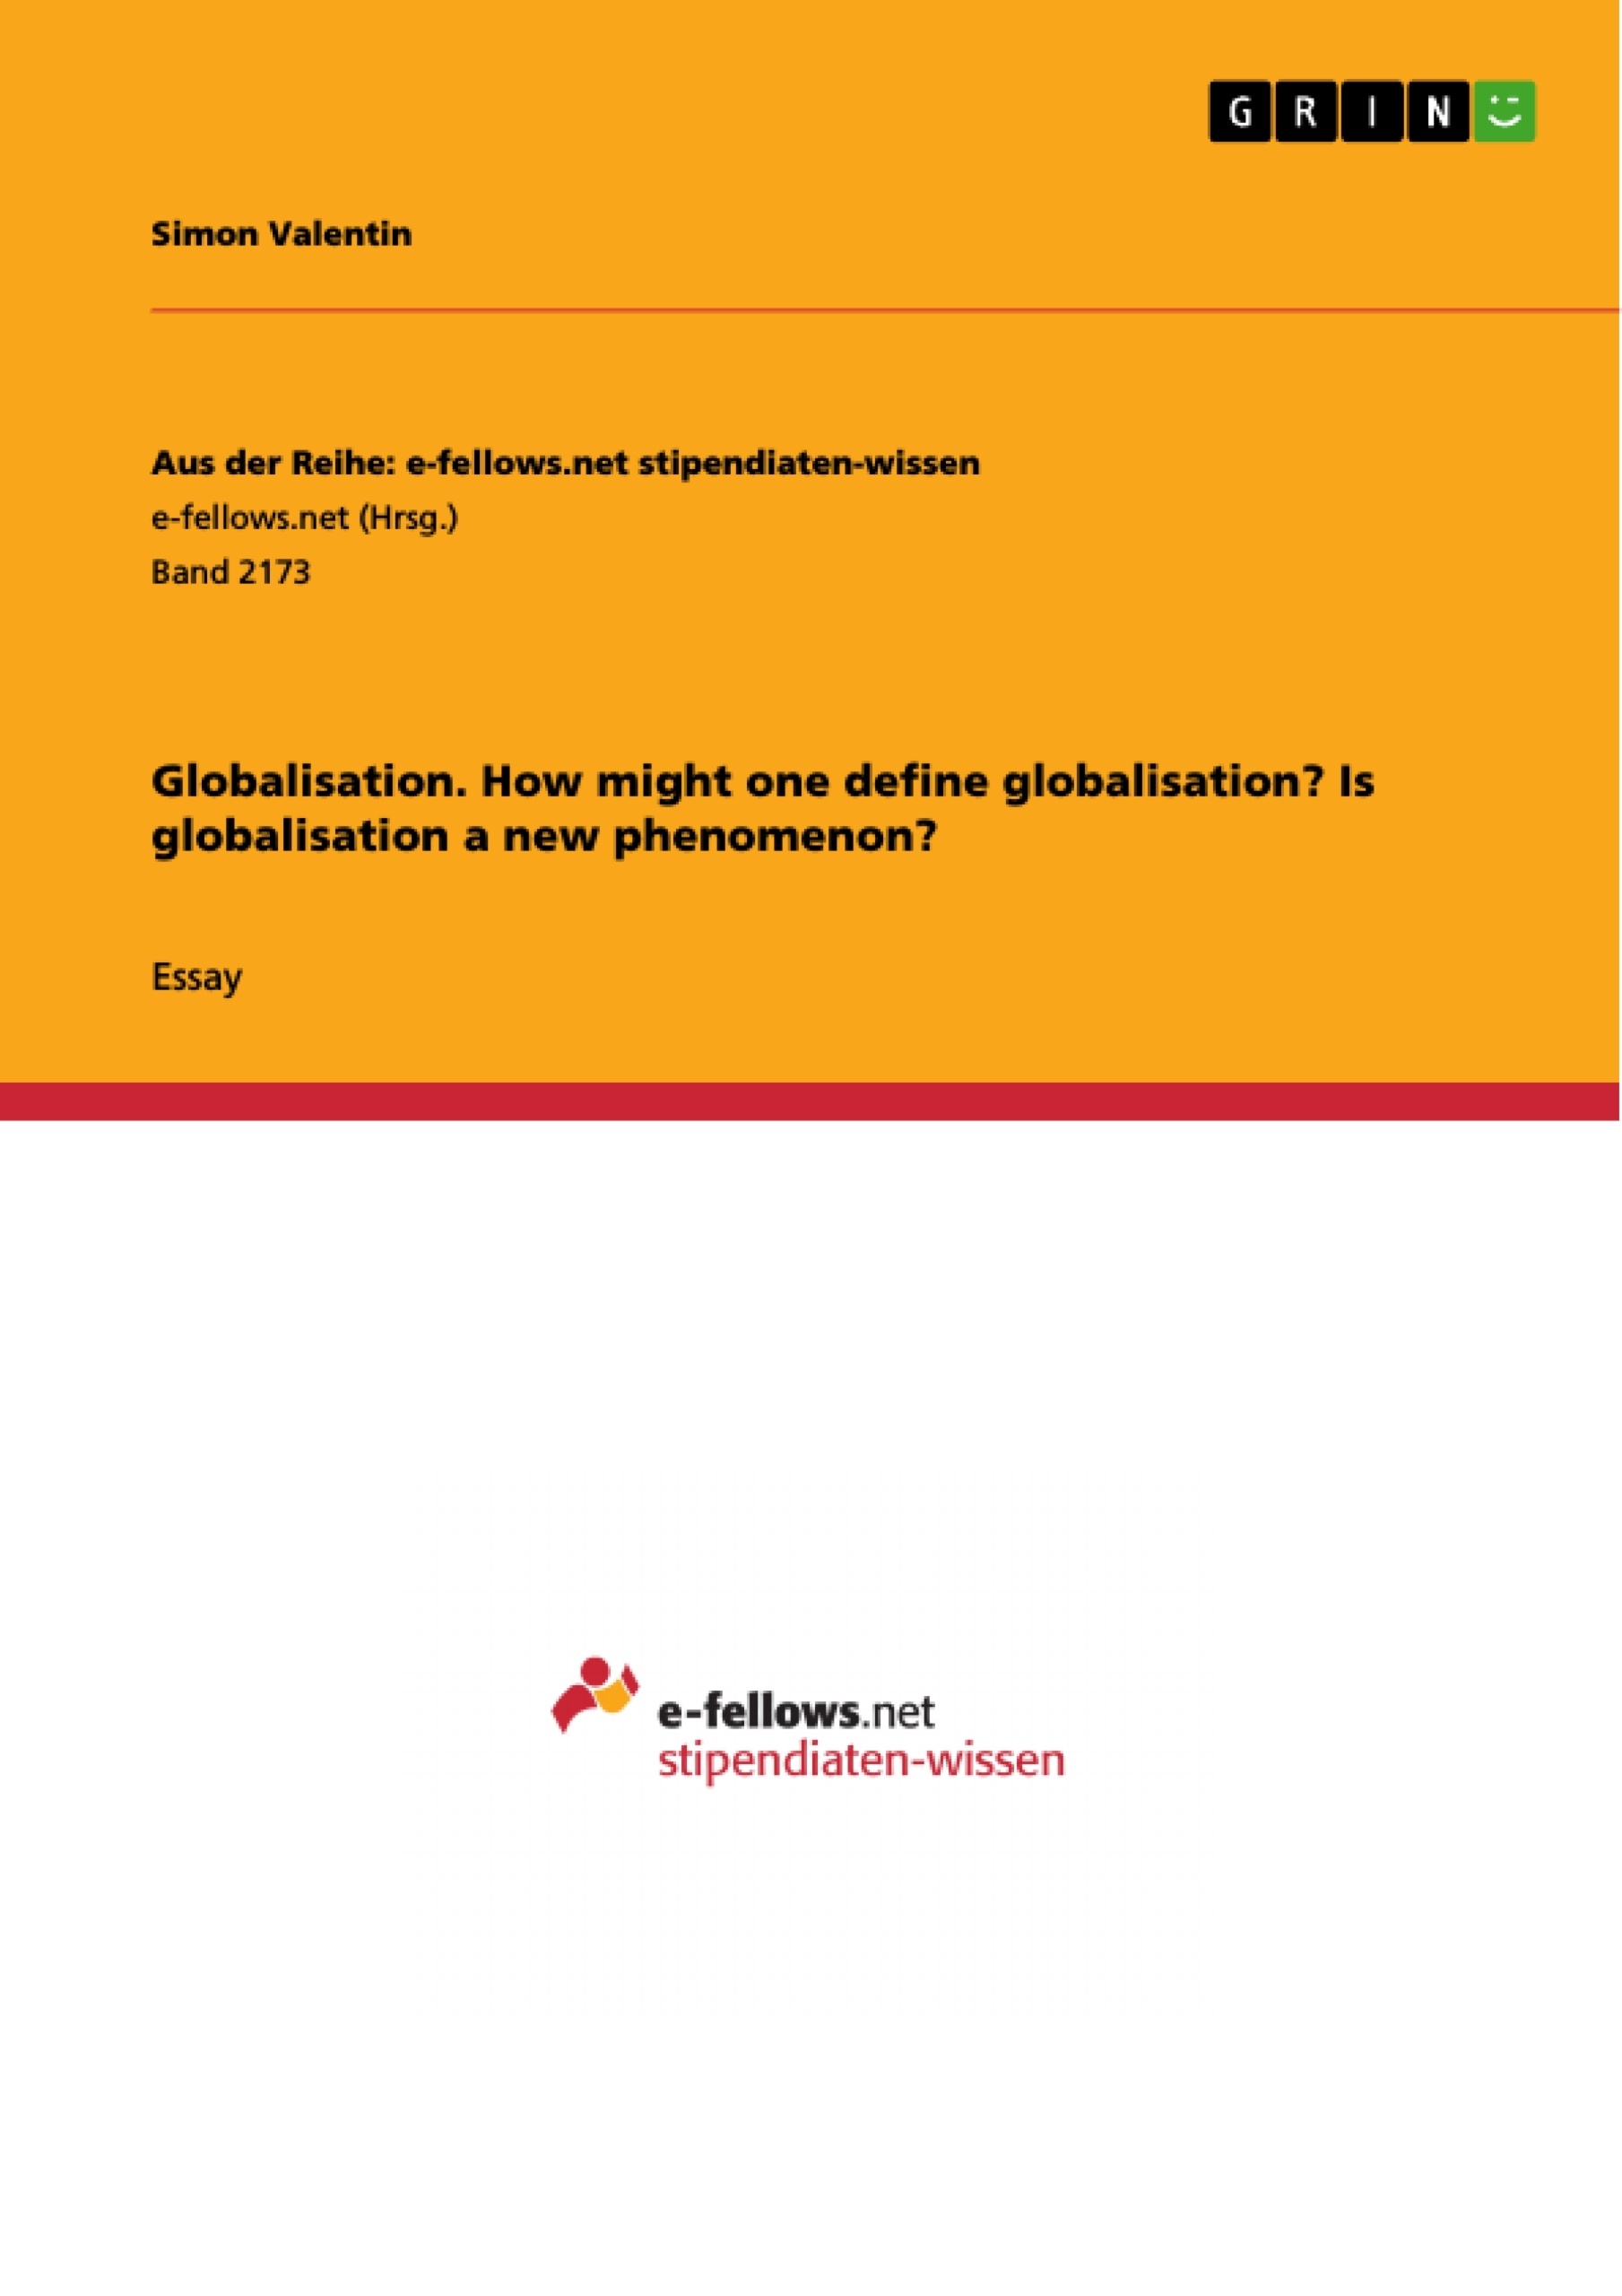 Title: Globalisation. How might one define globalisation? Is globalisation a new phenomenon?